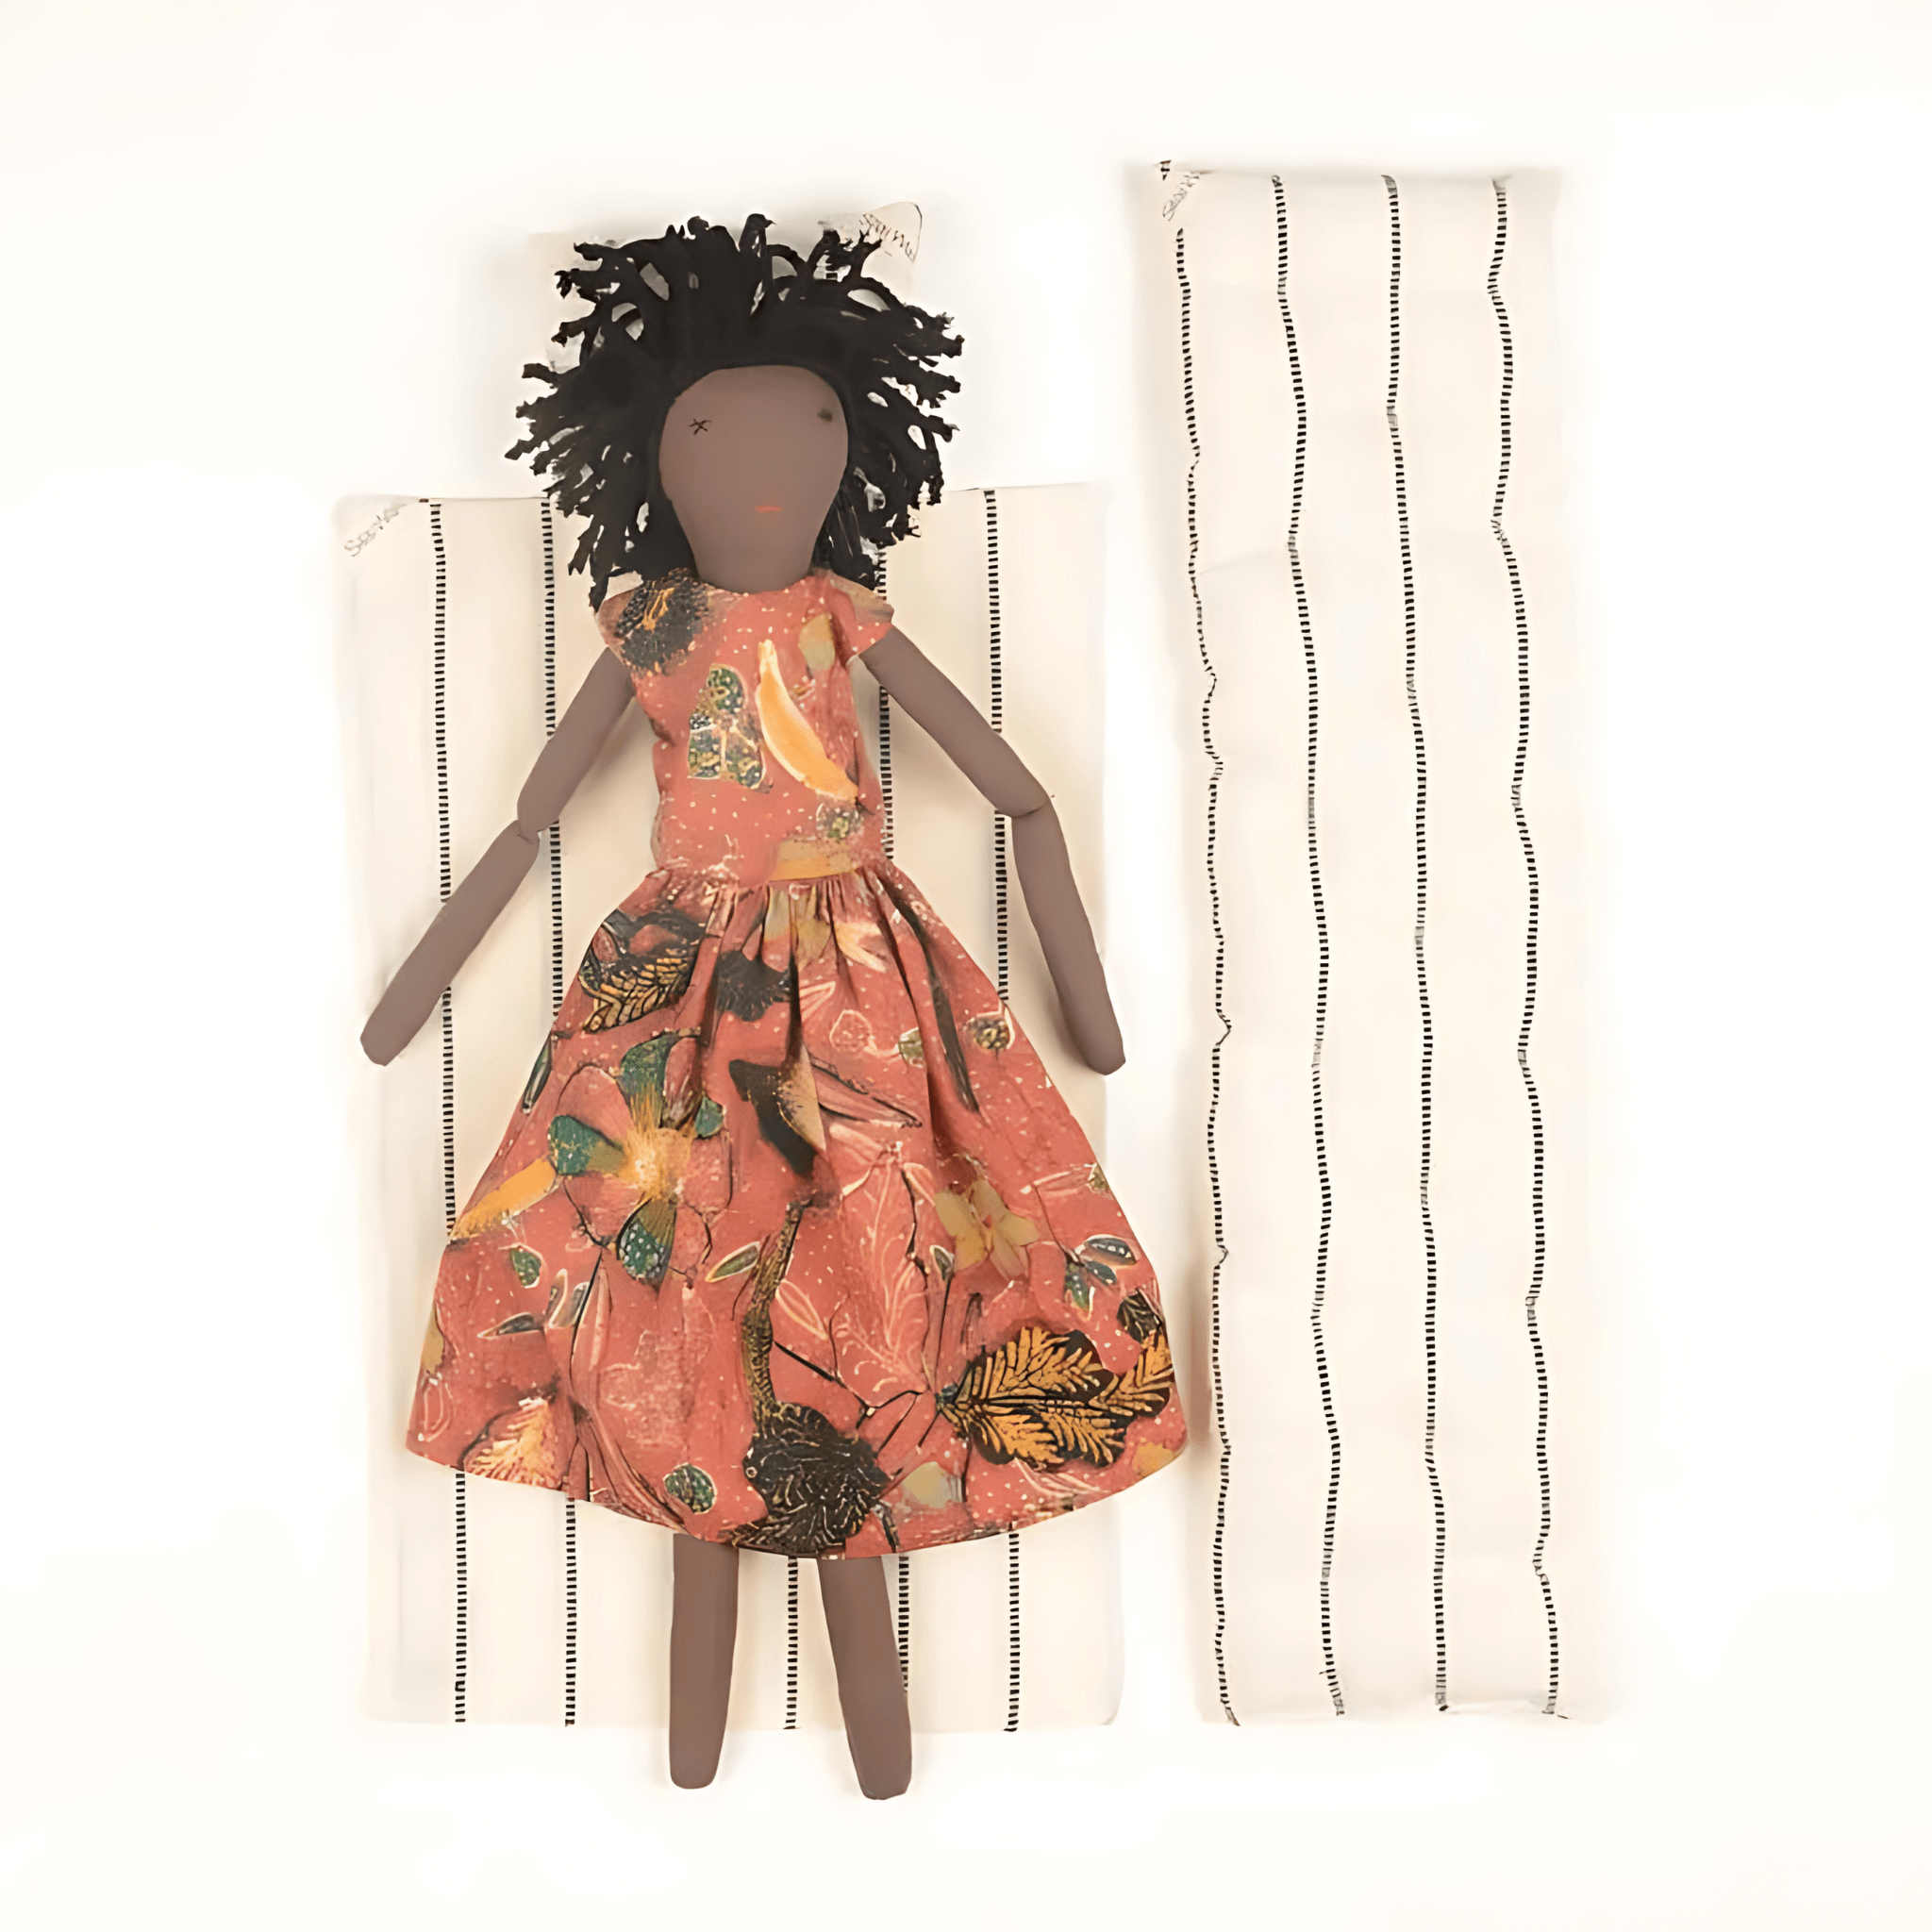 Handmade Fabric Black African Doll Kit with Blanket and Pillow from Silaiwali